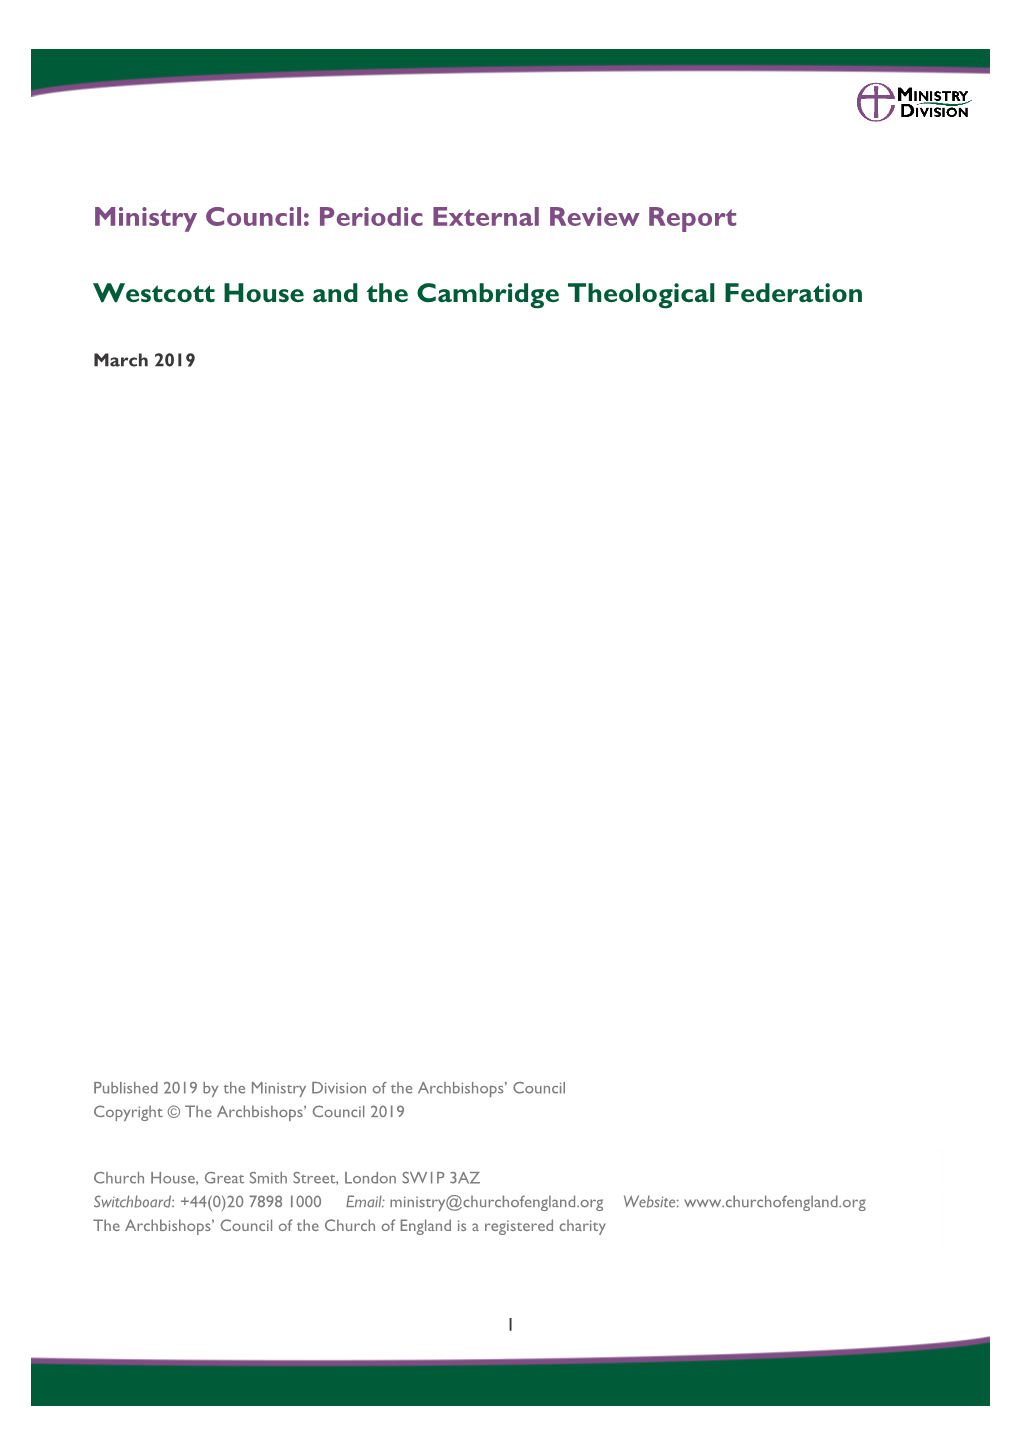 Periodic External Review Report Westcott House and the Cambridge